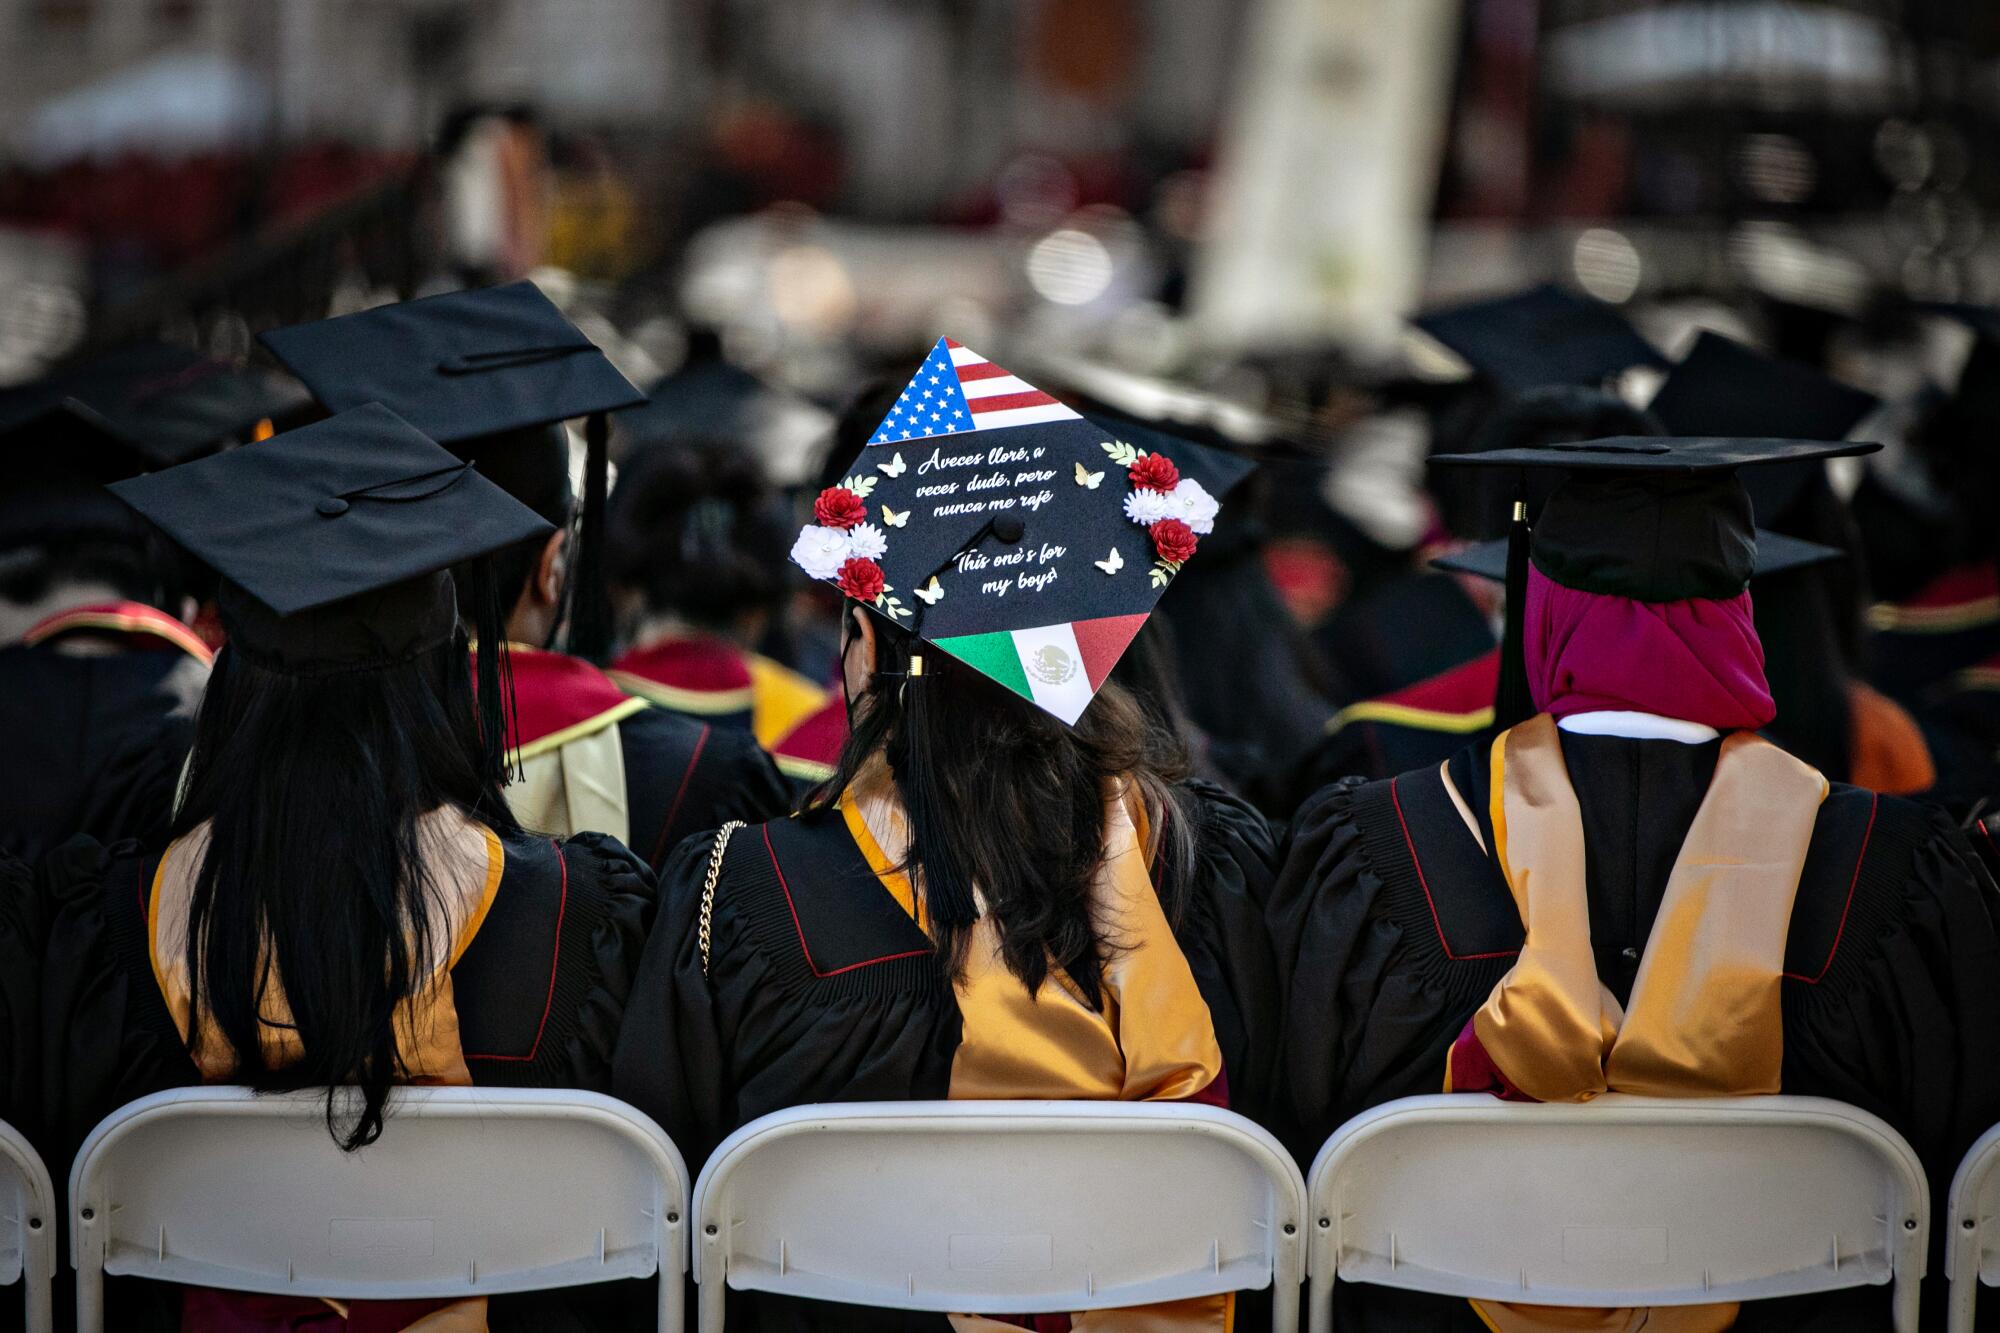 A view from behind several seated graduates